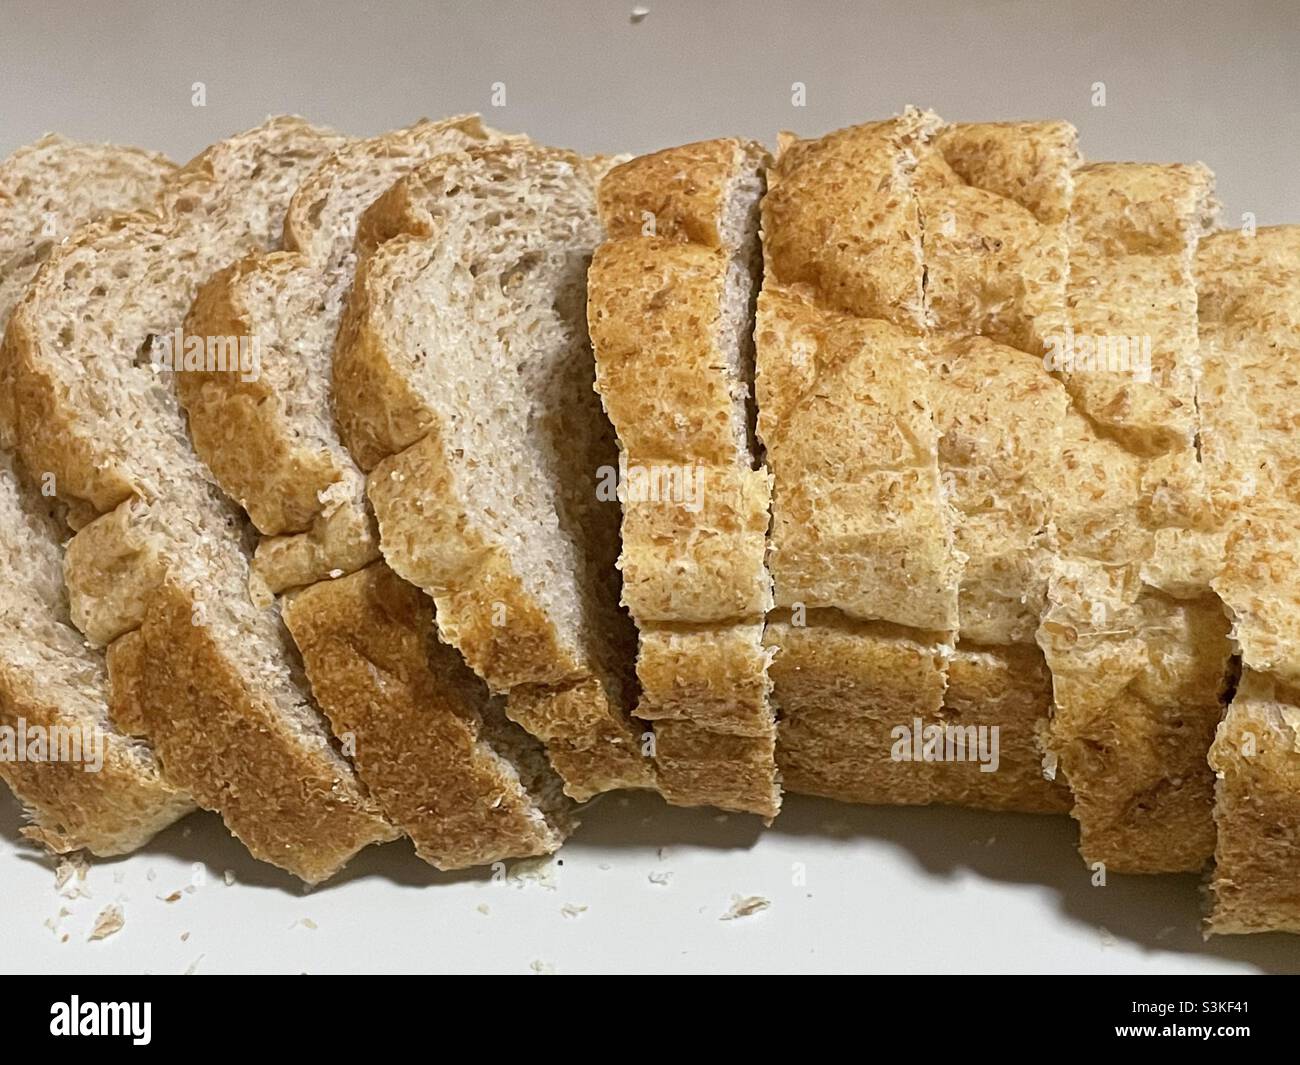 Fresh and nutritious homemade wholemeal bread from Malaysia. Stock Photo